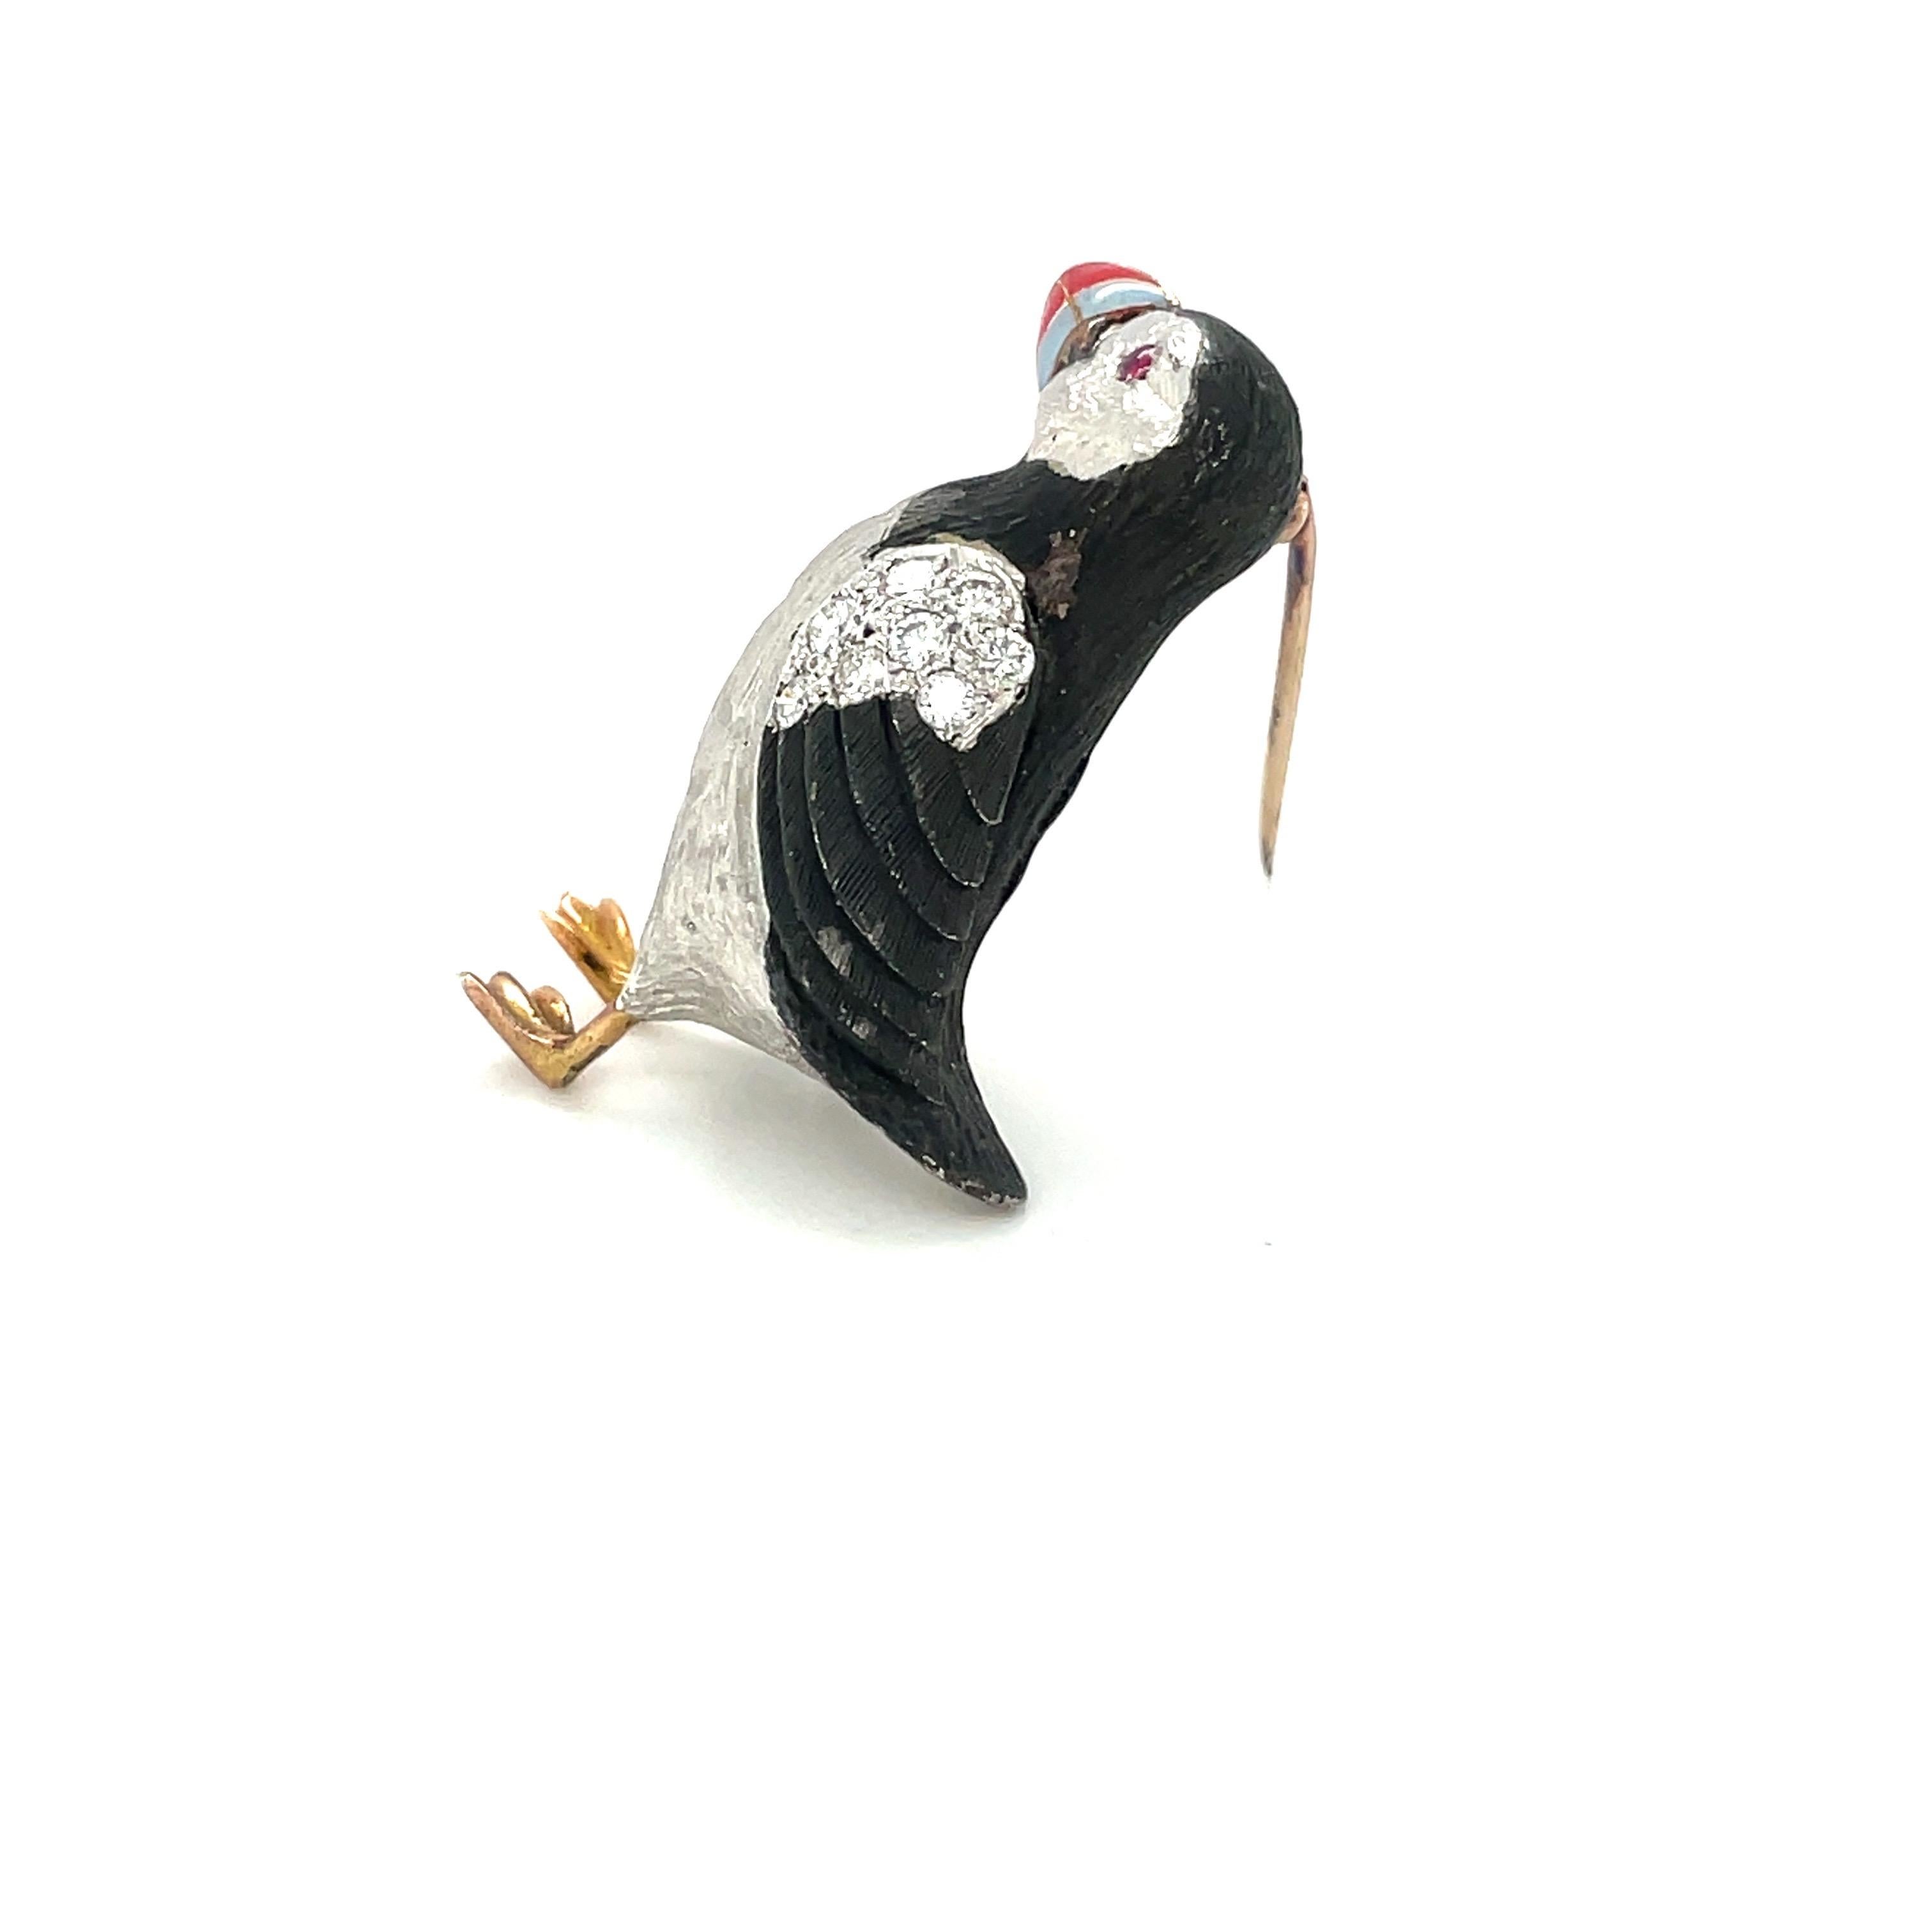 E. Wolfe & Co is a family-run fine jewellery manufacturing workshop, established in 1850 and located in central London. They specialize in creating beautiful bespoke pieces.
This puffin brooch is designed in an 18 karat white gold . It's brushed